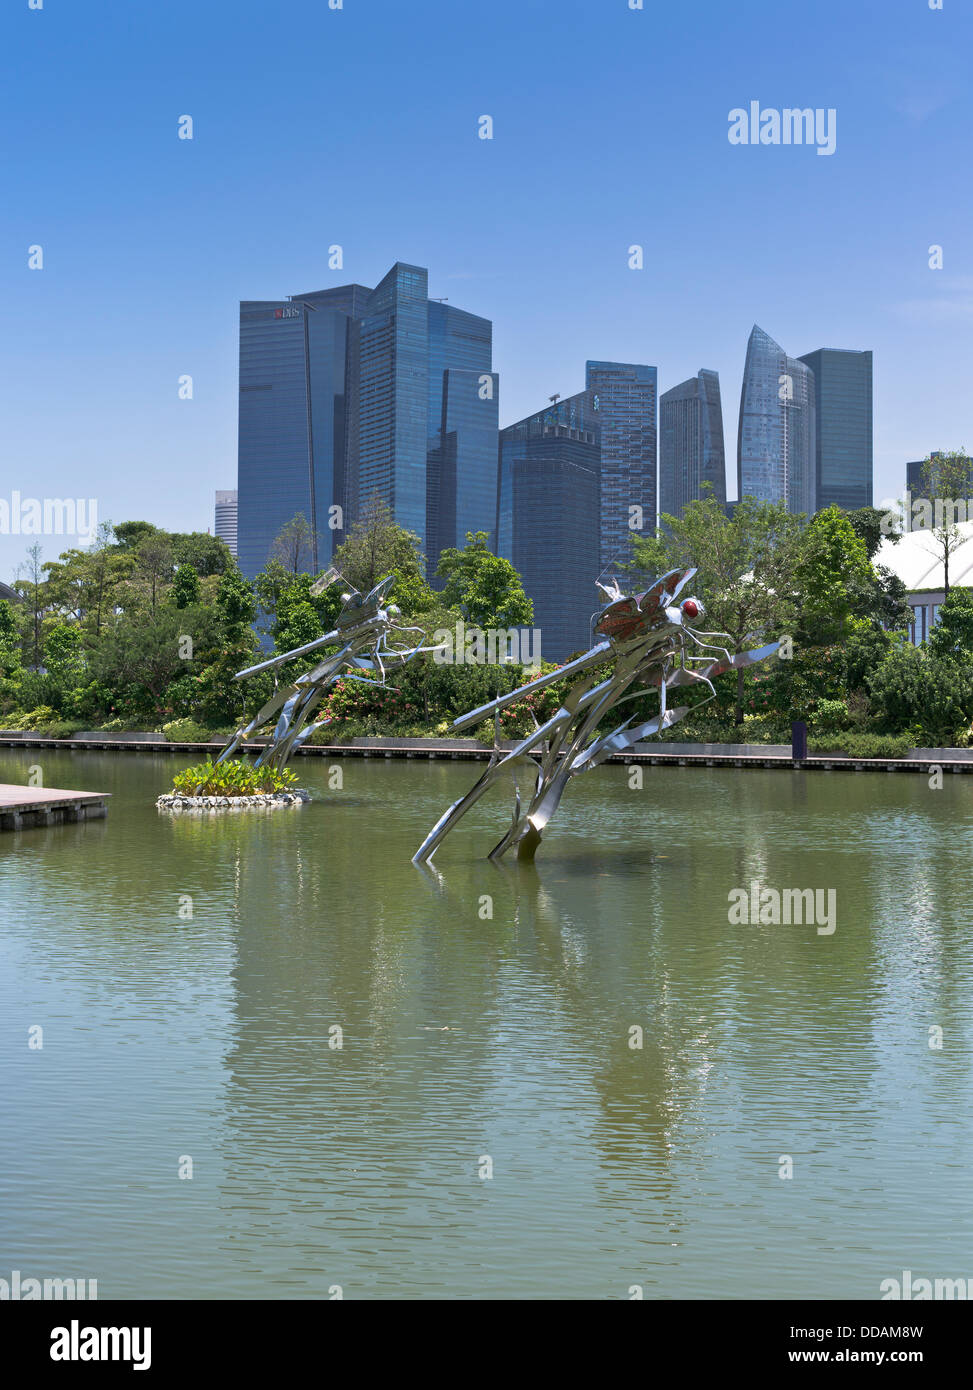 Jardin de Sculptures dh lake GARDENS BY THE BAY SINGAPORE Boy butterfly sculpture park chasing ville skyscapers skyline Banque D'Images